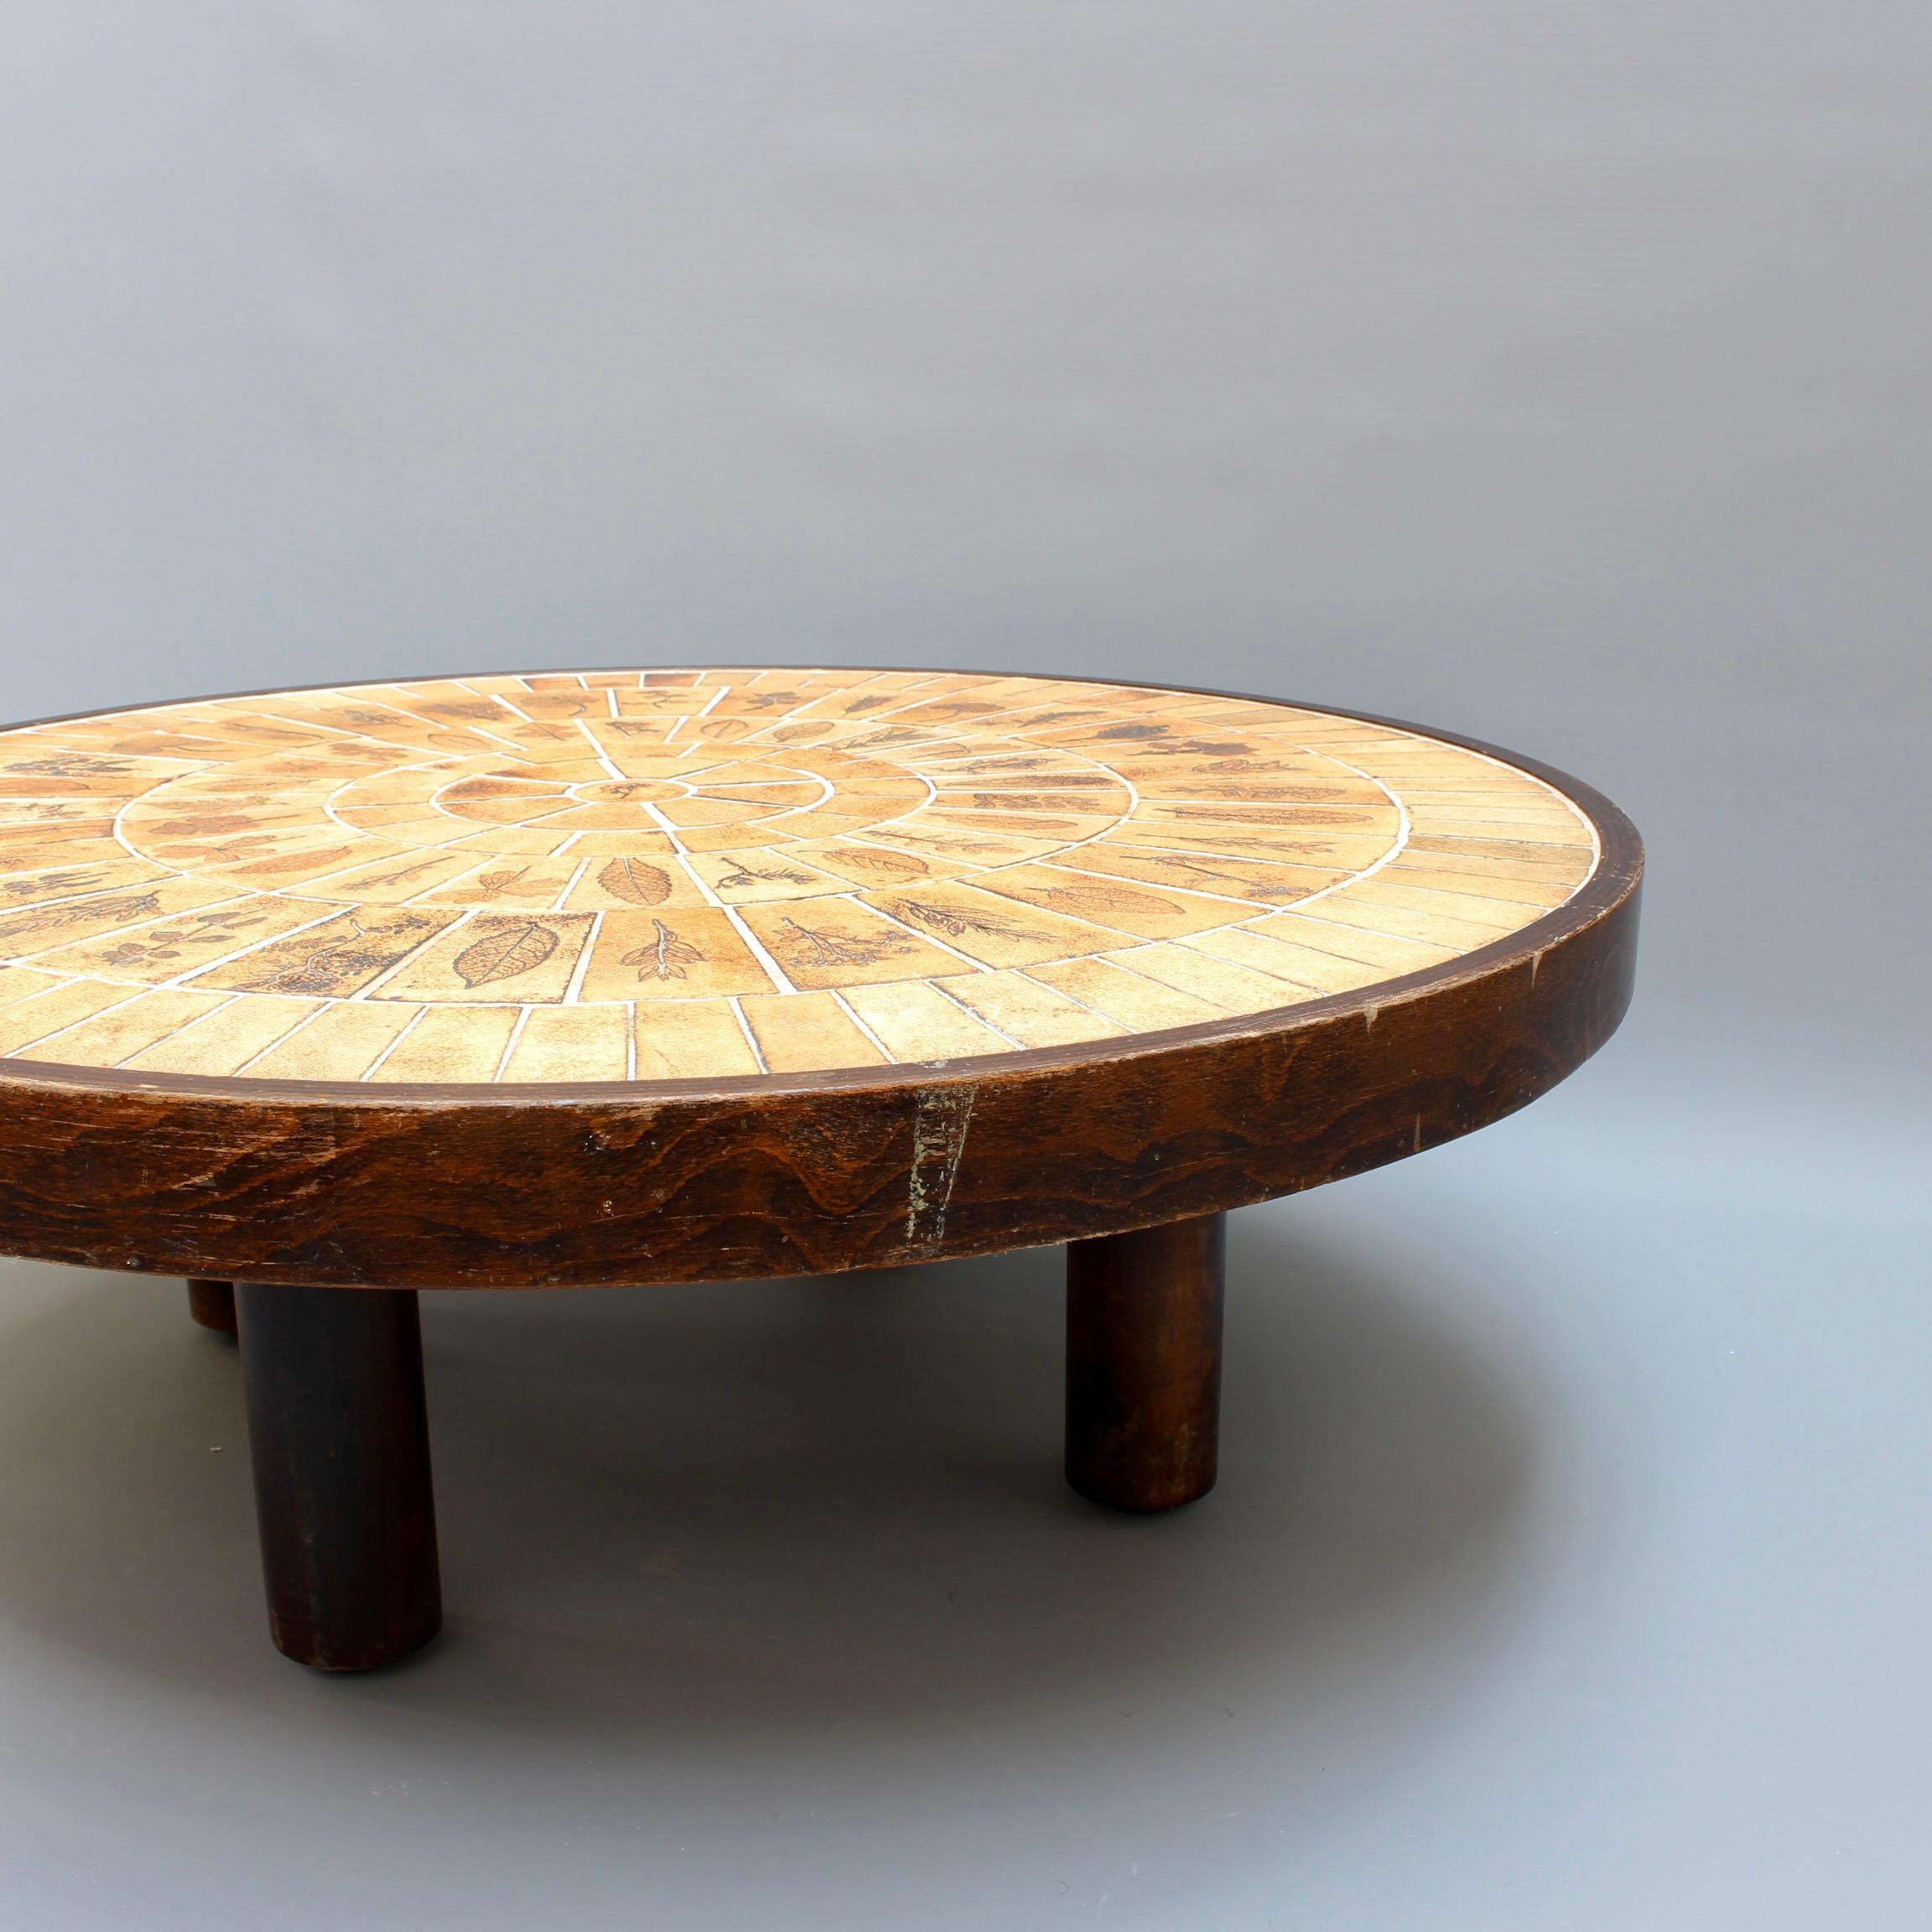 Late 20th Century Vintage French Round Tiled Coffee Table by Roger Capron 'circa 1970s'